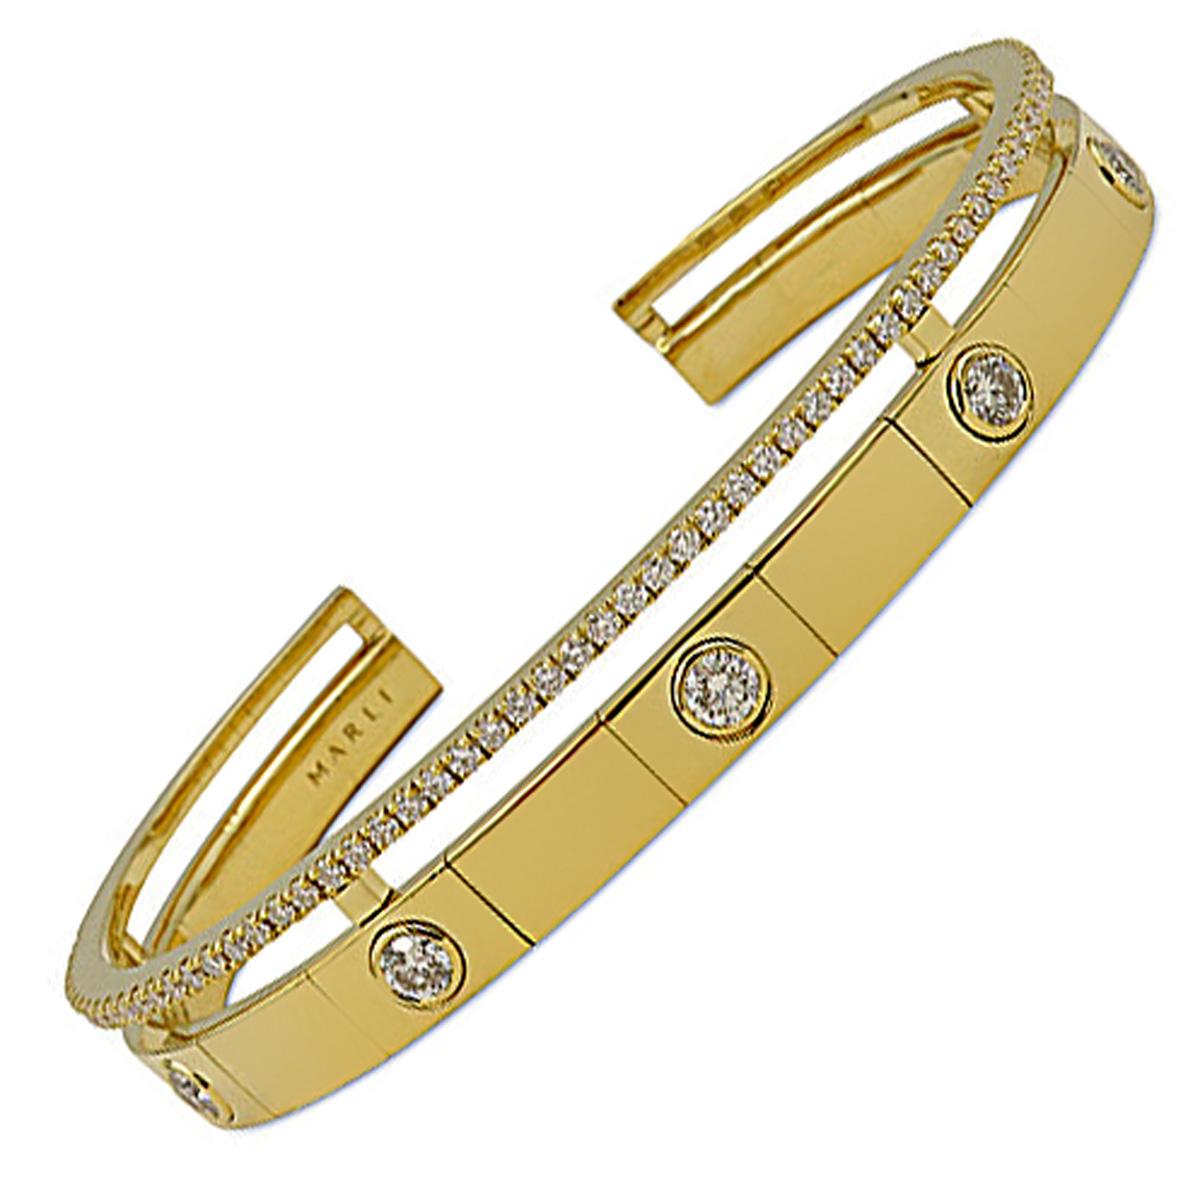 A chic diamond cuff bangle bracelet by Marli, this stunning flexible cuff bracelet showcases round brilliant cut diamonds weighing 1.20ct in 18k yellow gold.